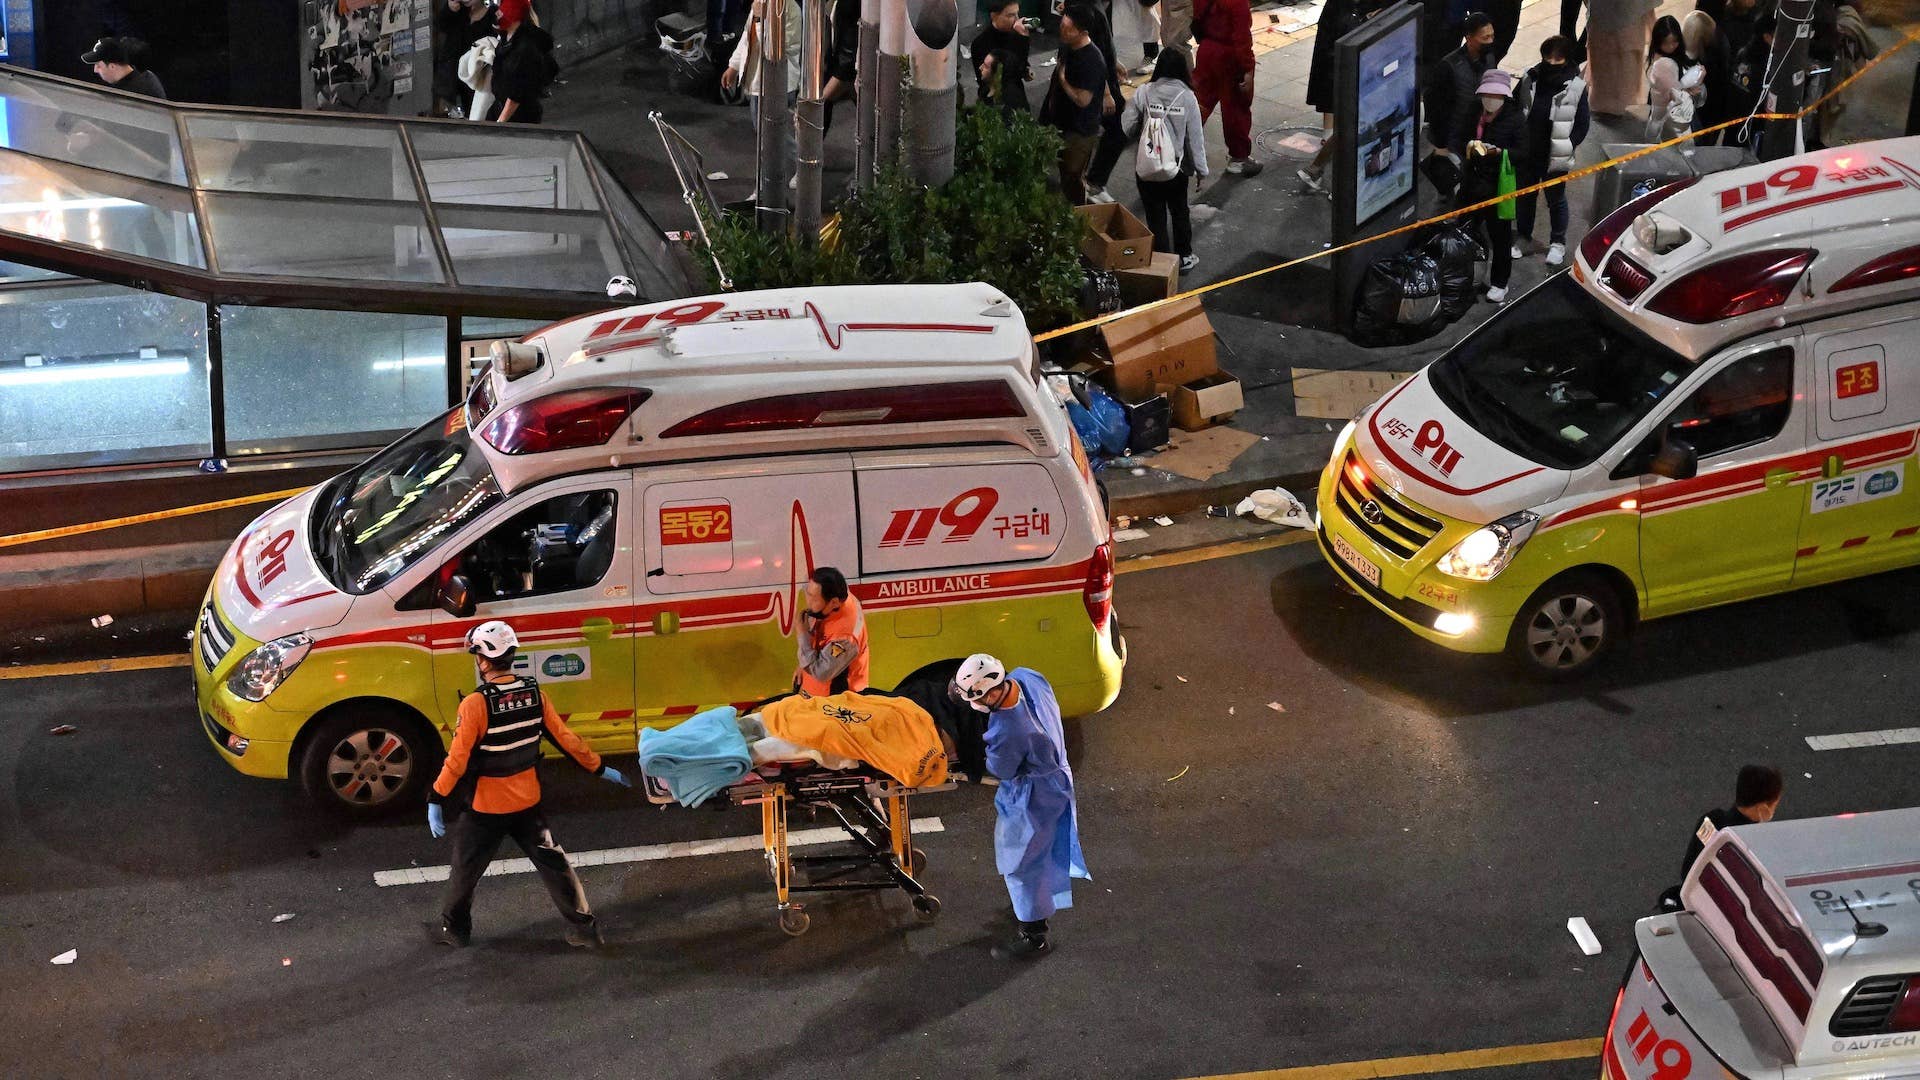 The body of a victim of cardiac arrest is transported in the popular nightlife district of Itaewon